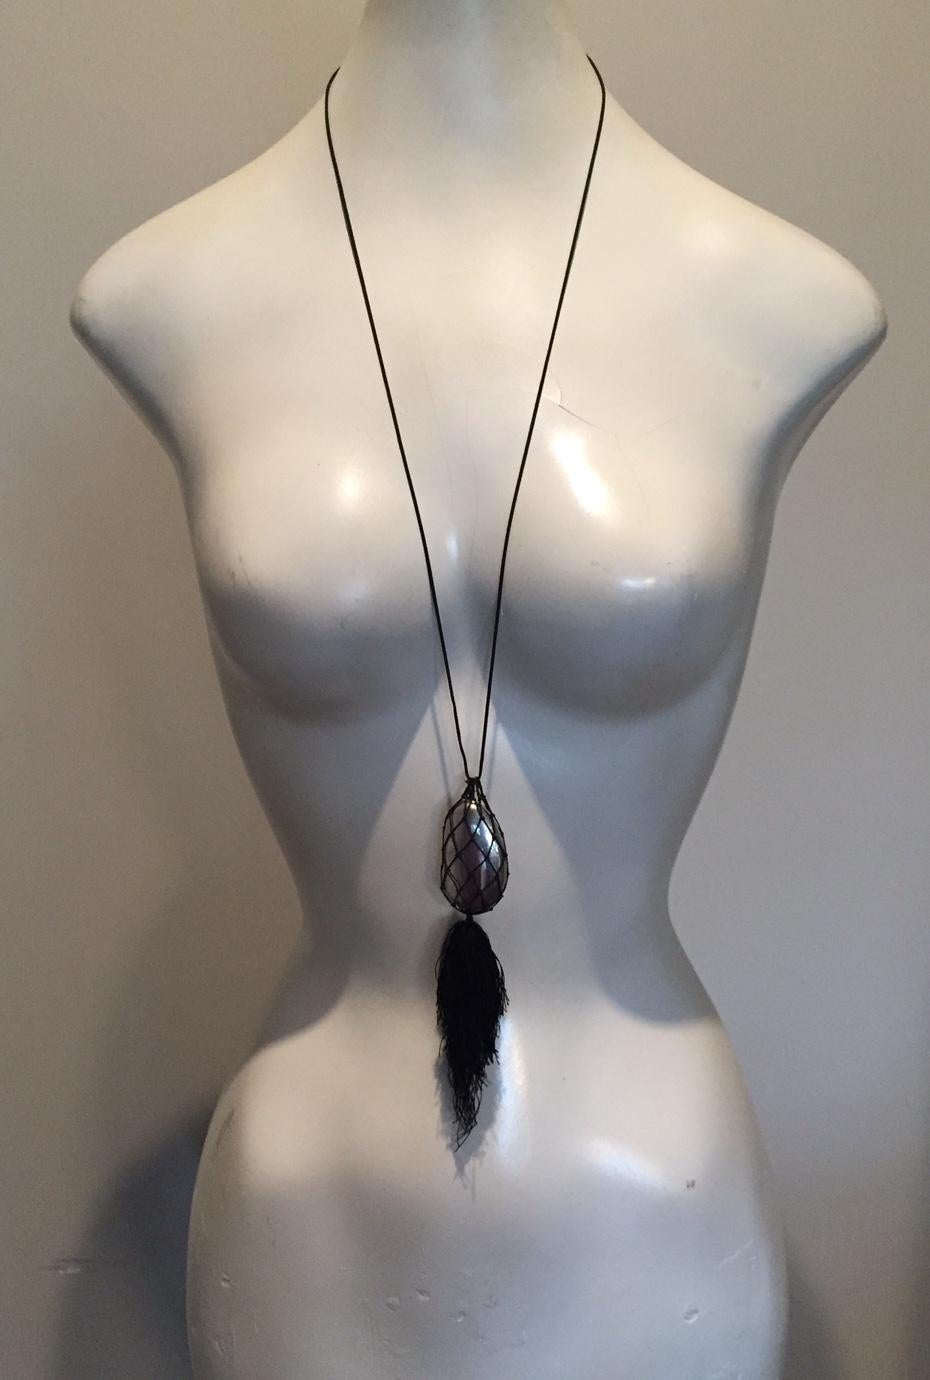 An unusual and rare form for the iconic Elsa Peretti bean, this large sterling silver bean is cradled in a hand woven black mesh bag. A large black tassel is suspended from the bag and a black cord completes the necklace. It is in excellent